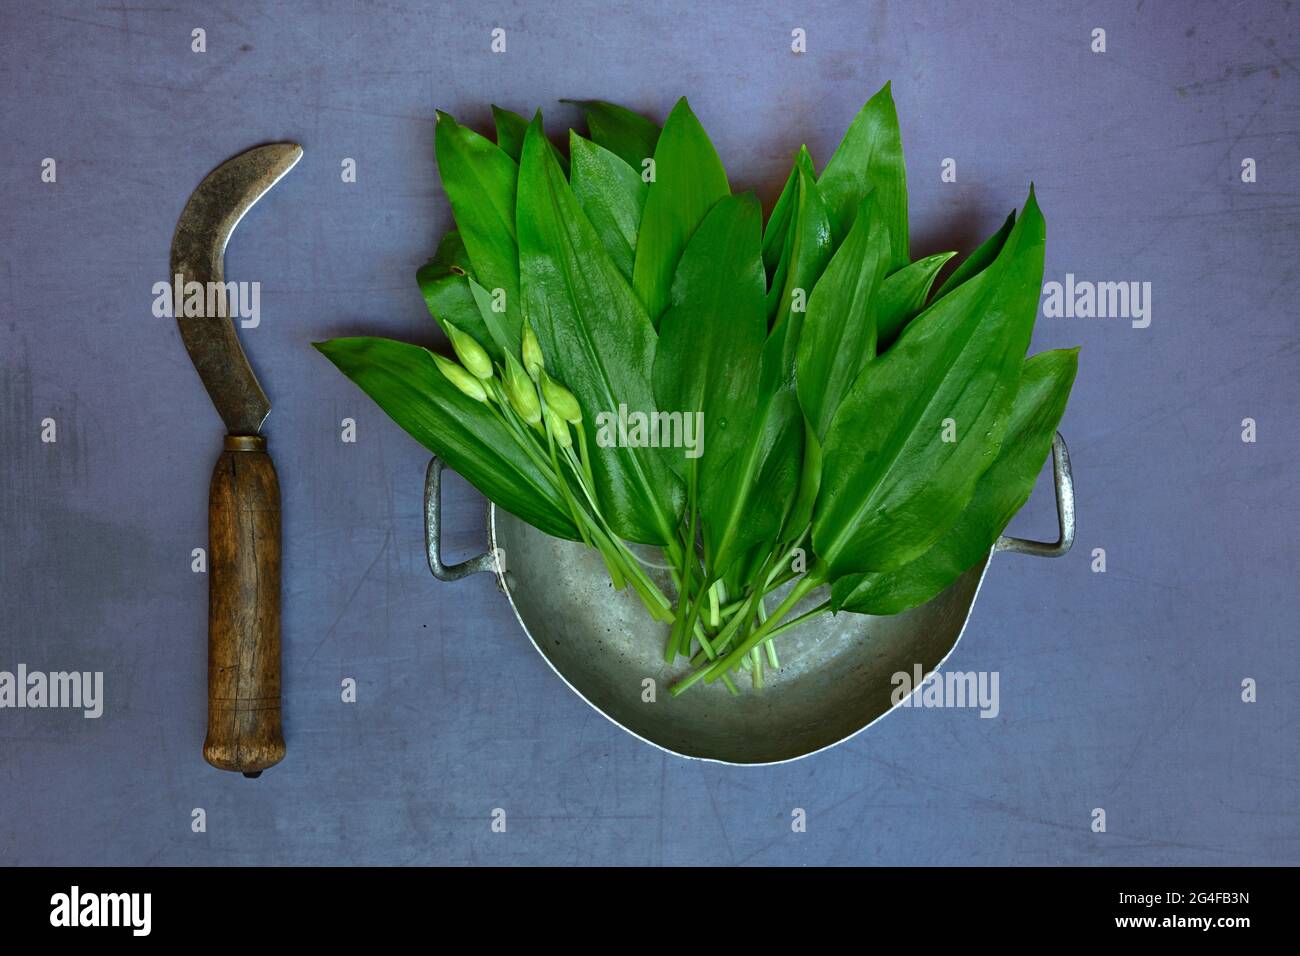 Bear's garlic, bear's garlic leaves and buds in bowl and garden crescent, Germany Stock Photo